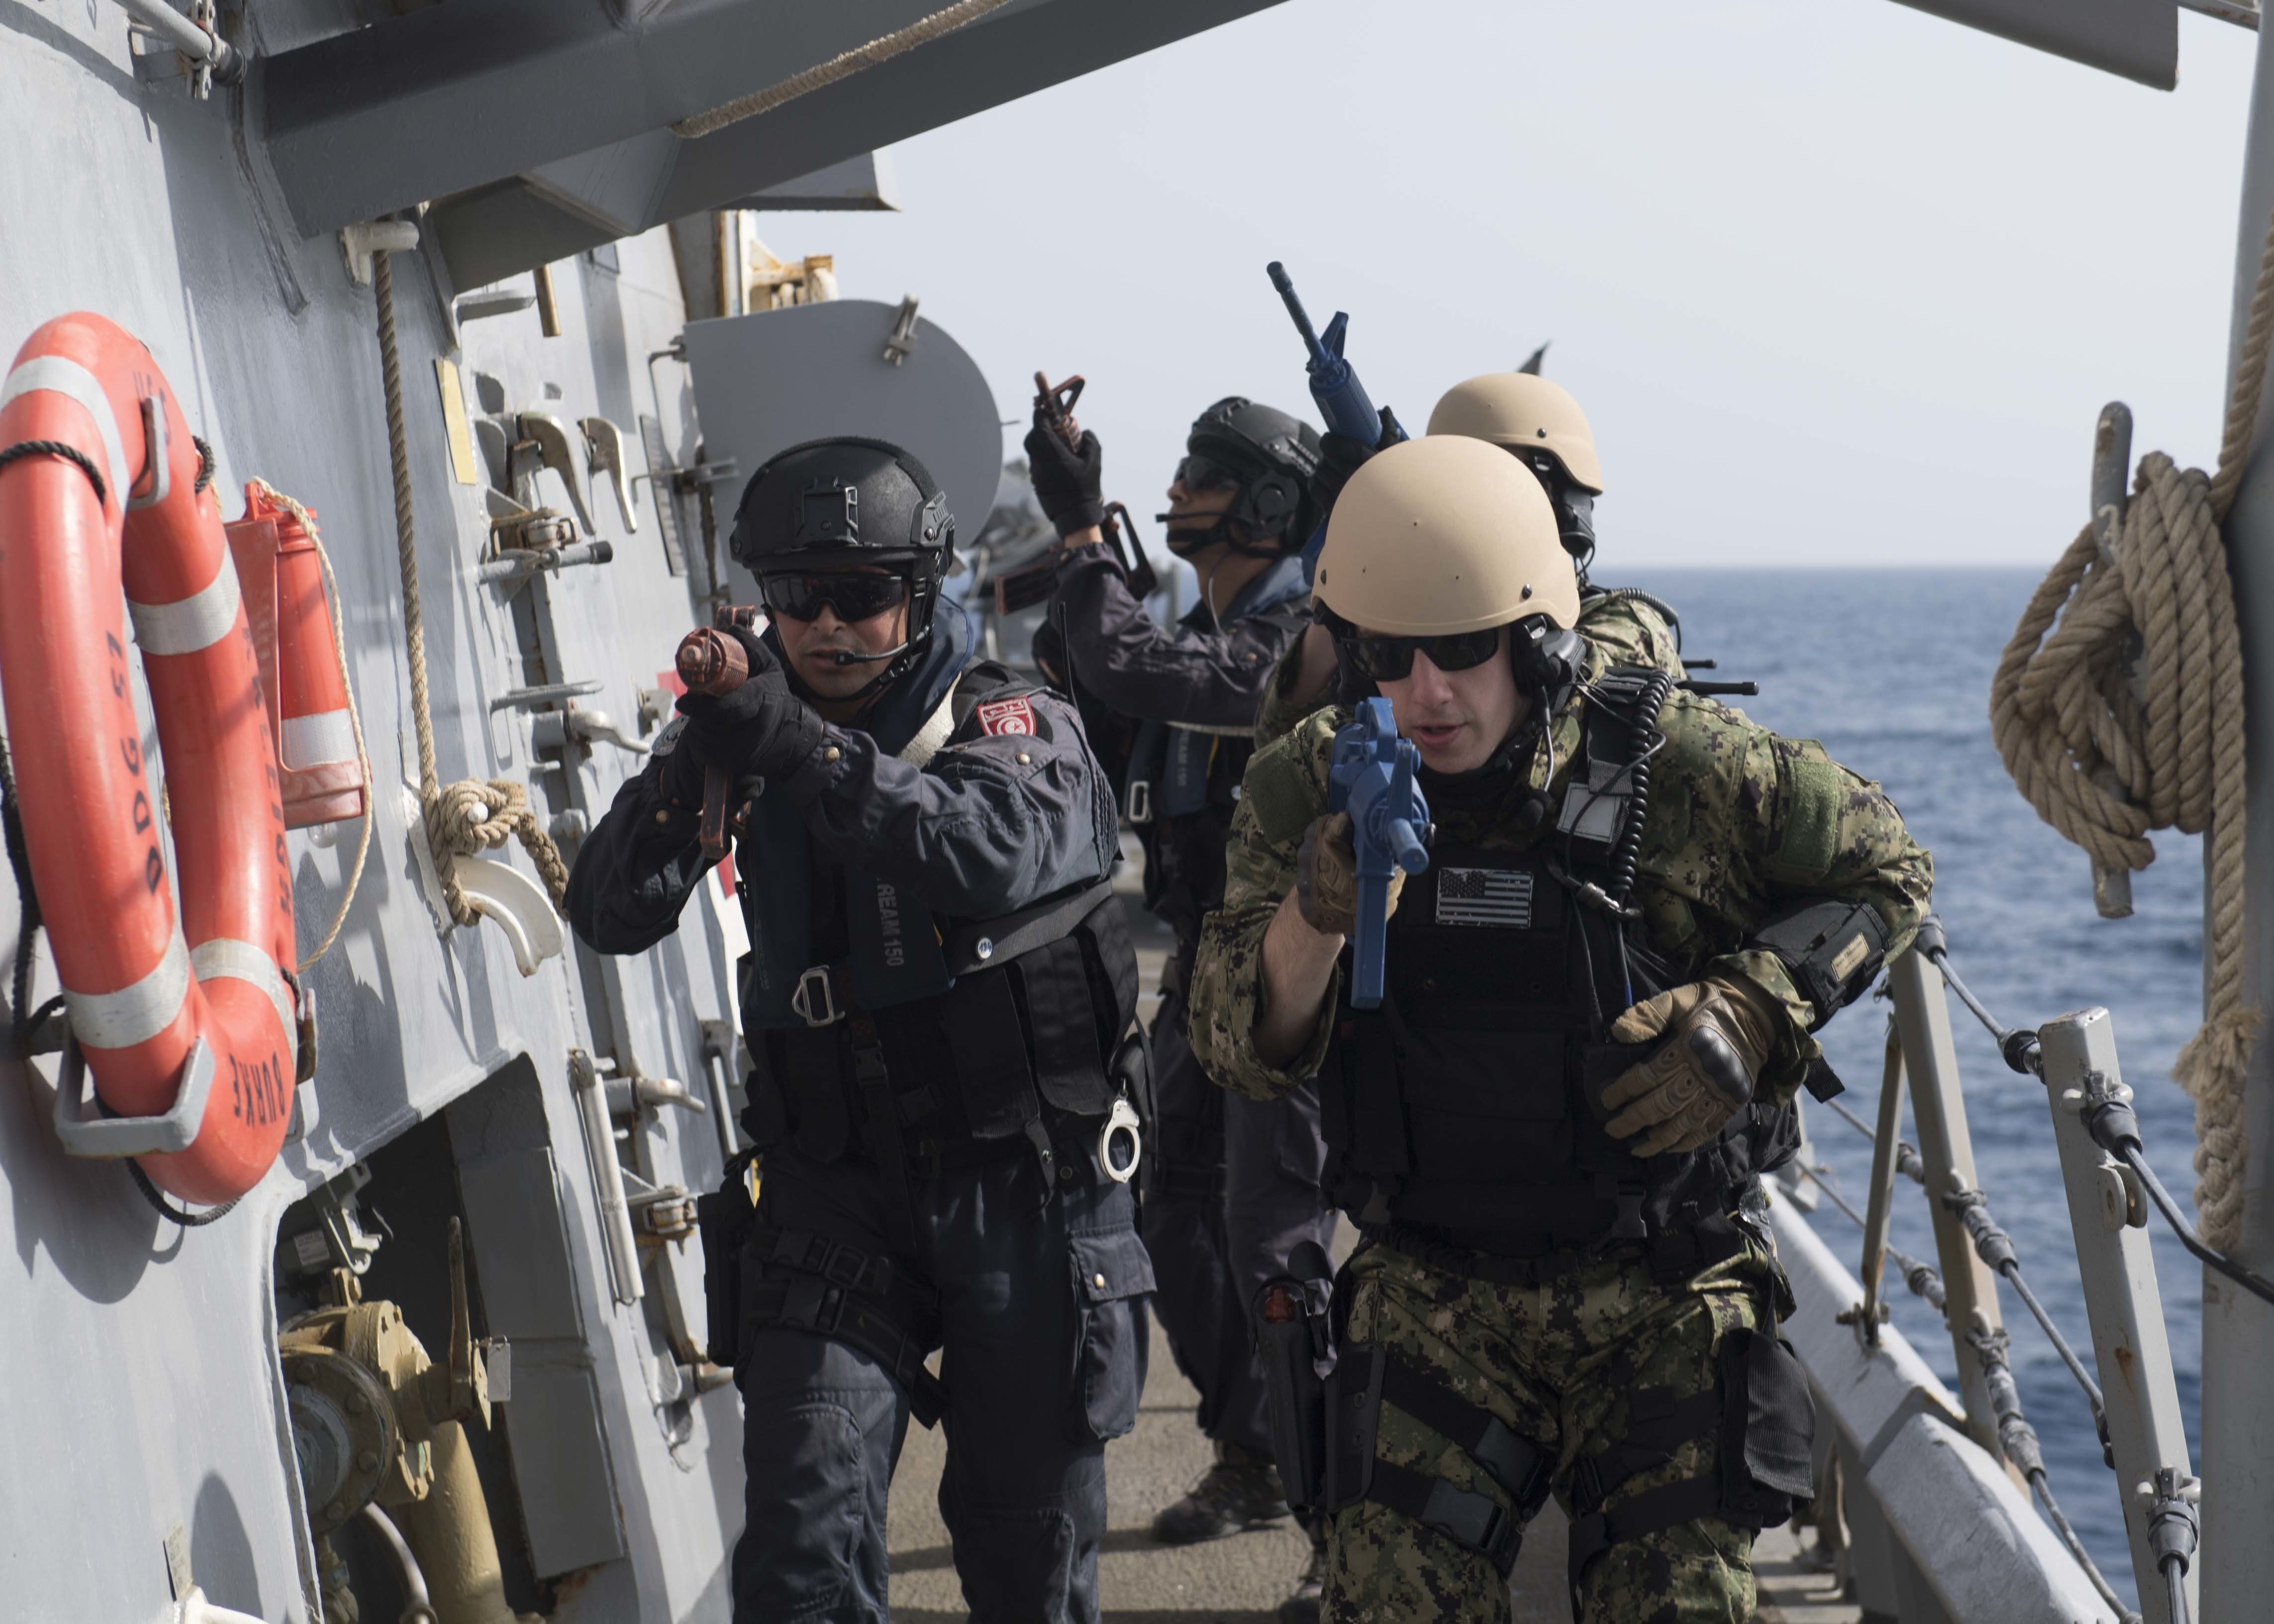 Sailors from Tunisia and the guided-missile destroyer USS Arleigh Burke (DDG 51) simulate clearing a ship during a training exercise on April 25. The Tunisian navy operates with a level of professionalism that equals its European partners, and most of its officers supplement their training with developmental opportunities with navies and industry partners around the world. (U.S. Navy photo by Mass Communication Specialist Seaman Raymond Maddocks)